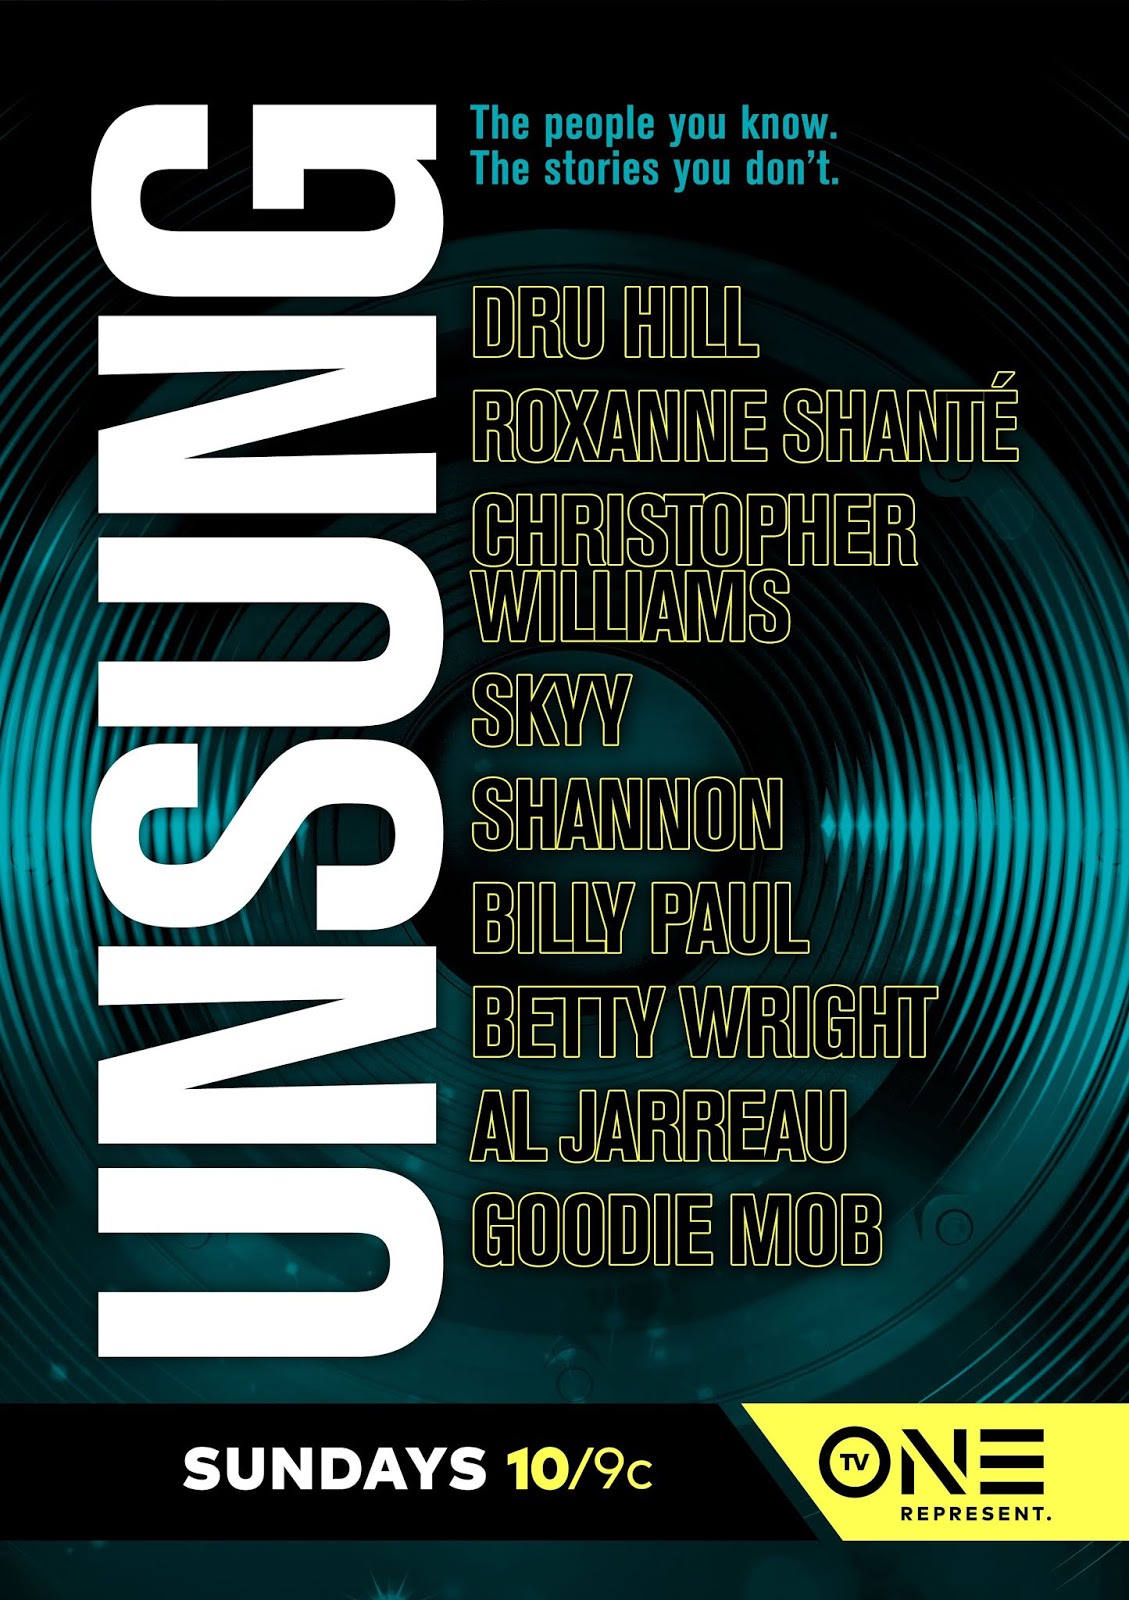 'UNSUNG' RETURNS TO TV ONE WITH DRU HILL, GOODIE MOB AND SHANNON